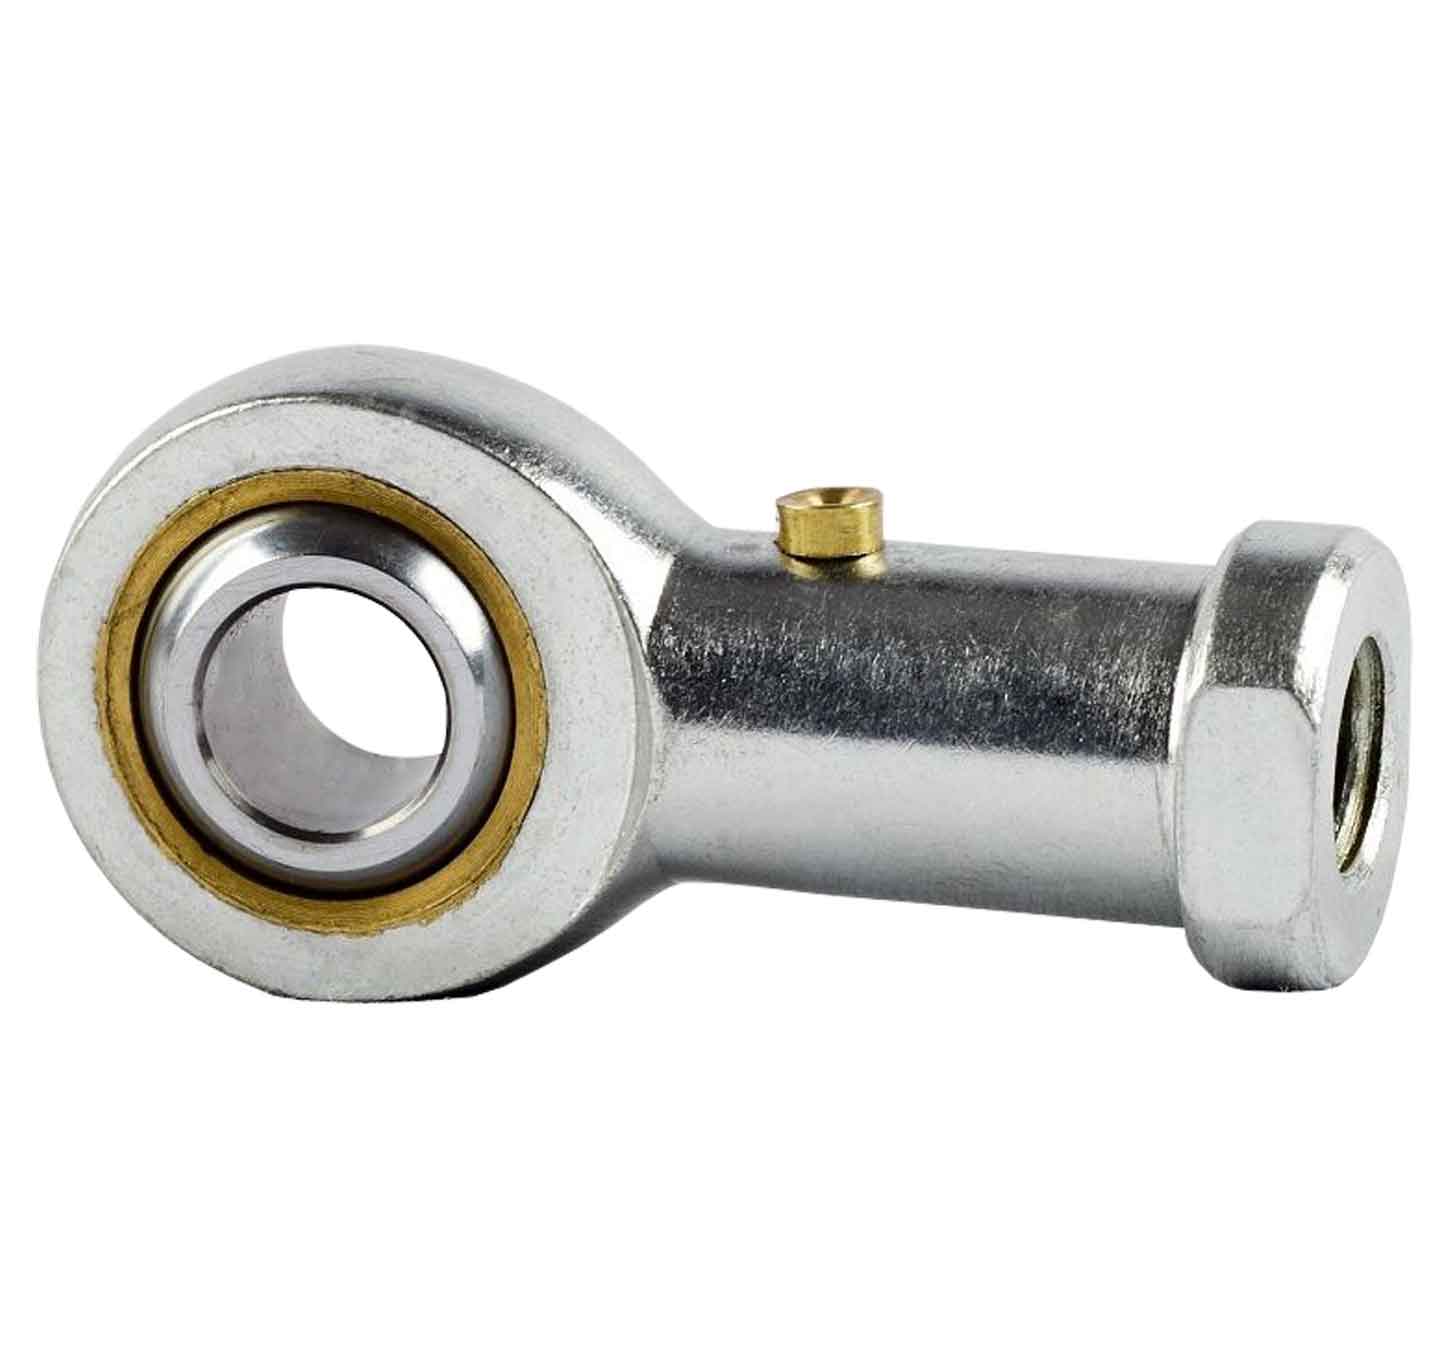 M8 x 1.25mm Female Right Hand Threaded Rod End Joint Bearing 8mm 